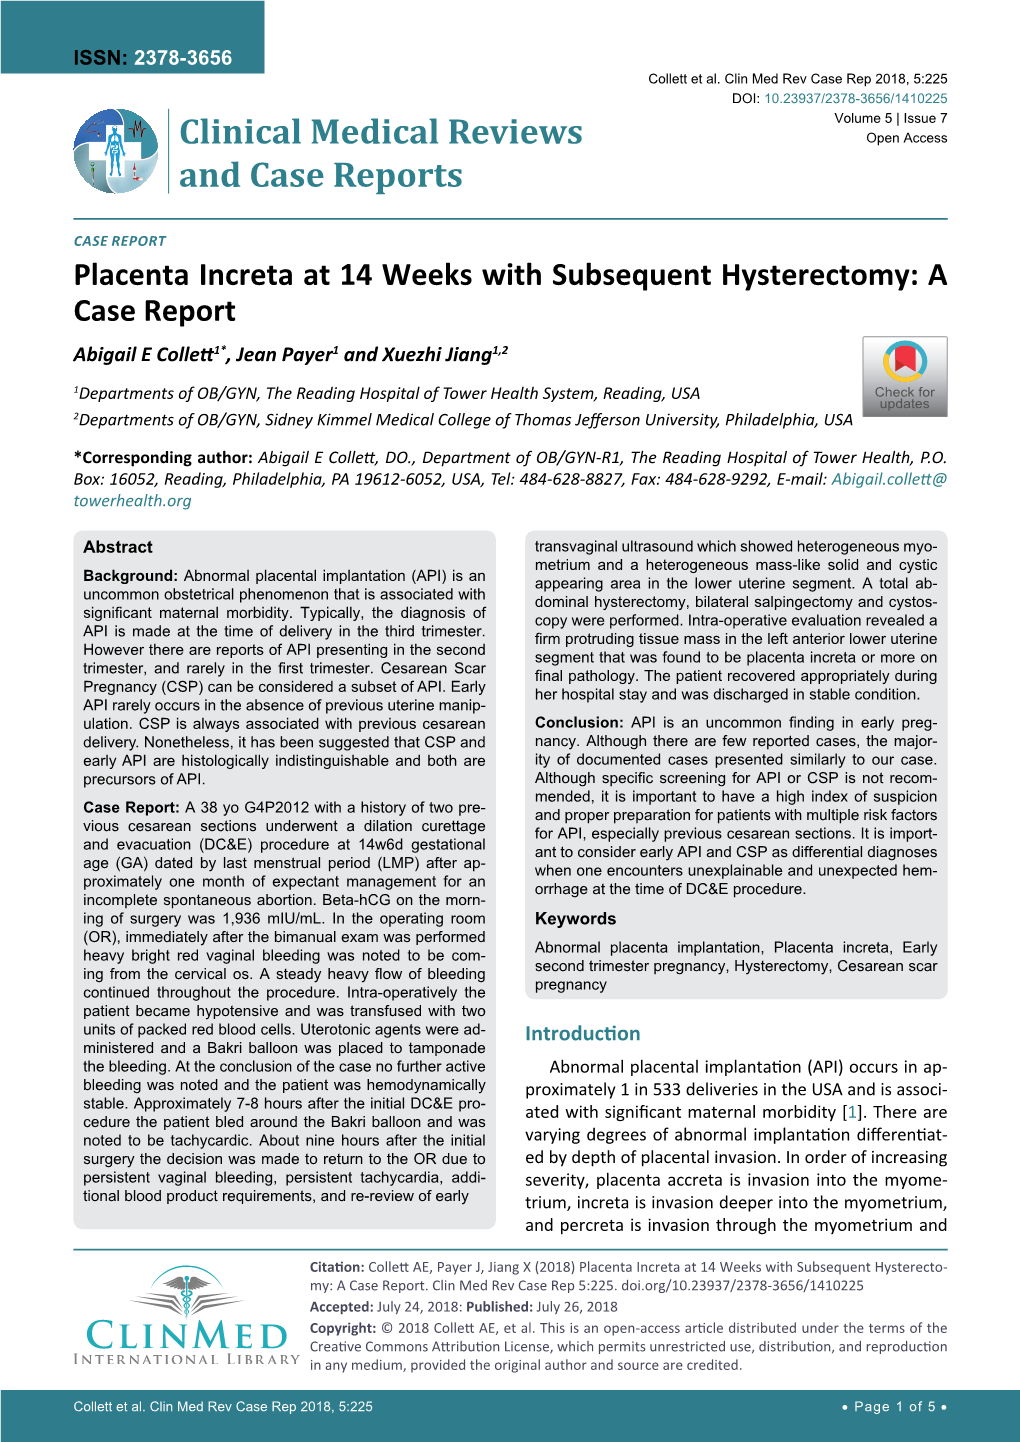 Placenta Increta at 14 Weeks with Subsequent Hysterectomy: a Case Report Abigail E Collett1*, Jean Payer1 and Xuezhi Jiang1,2